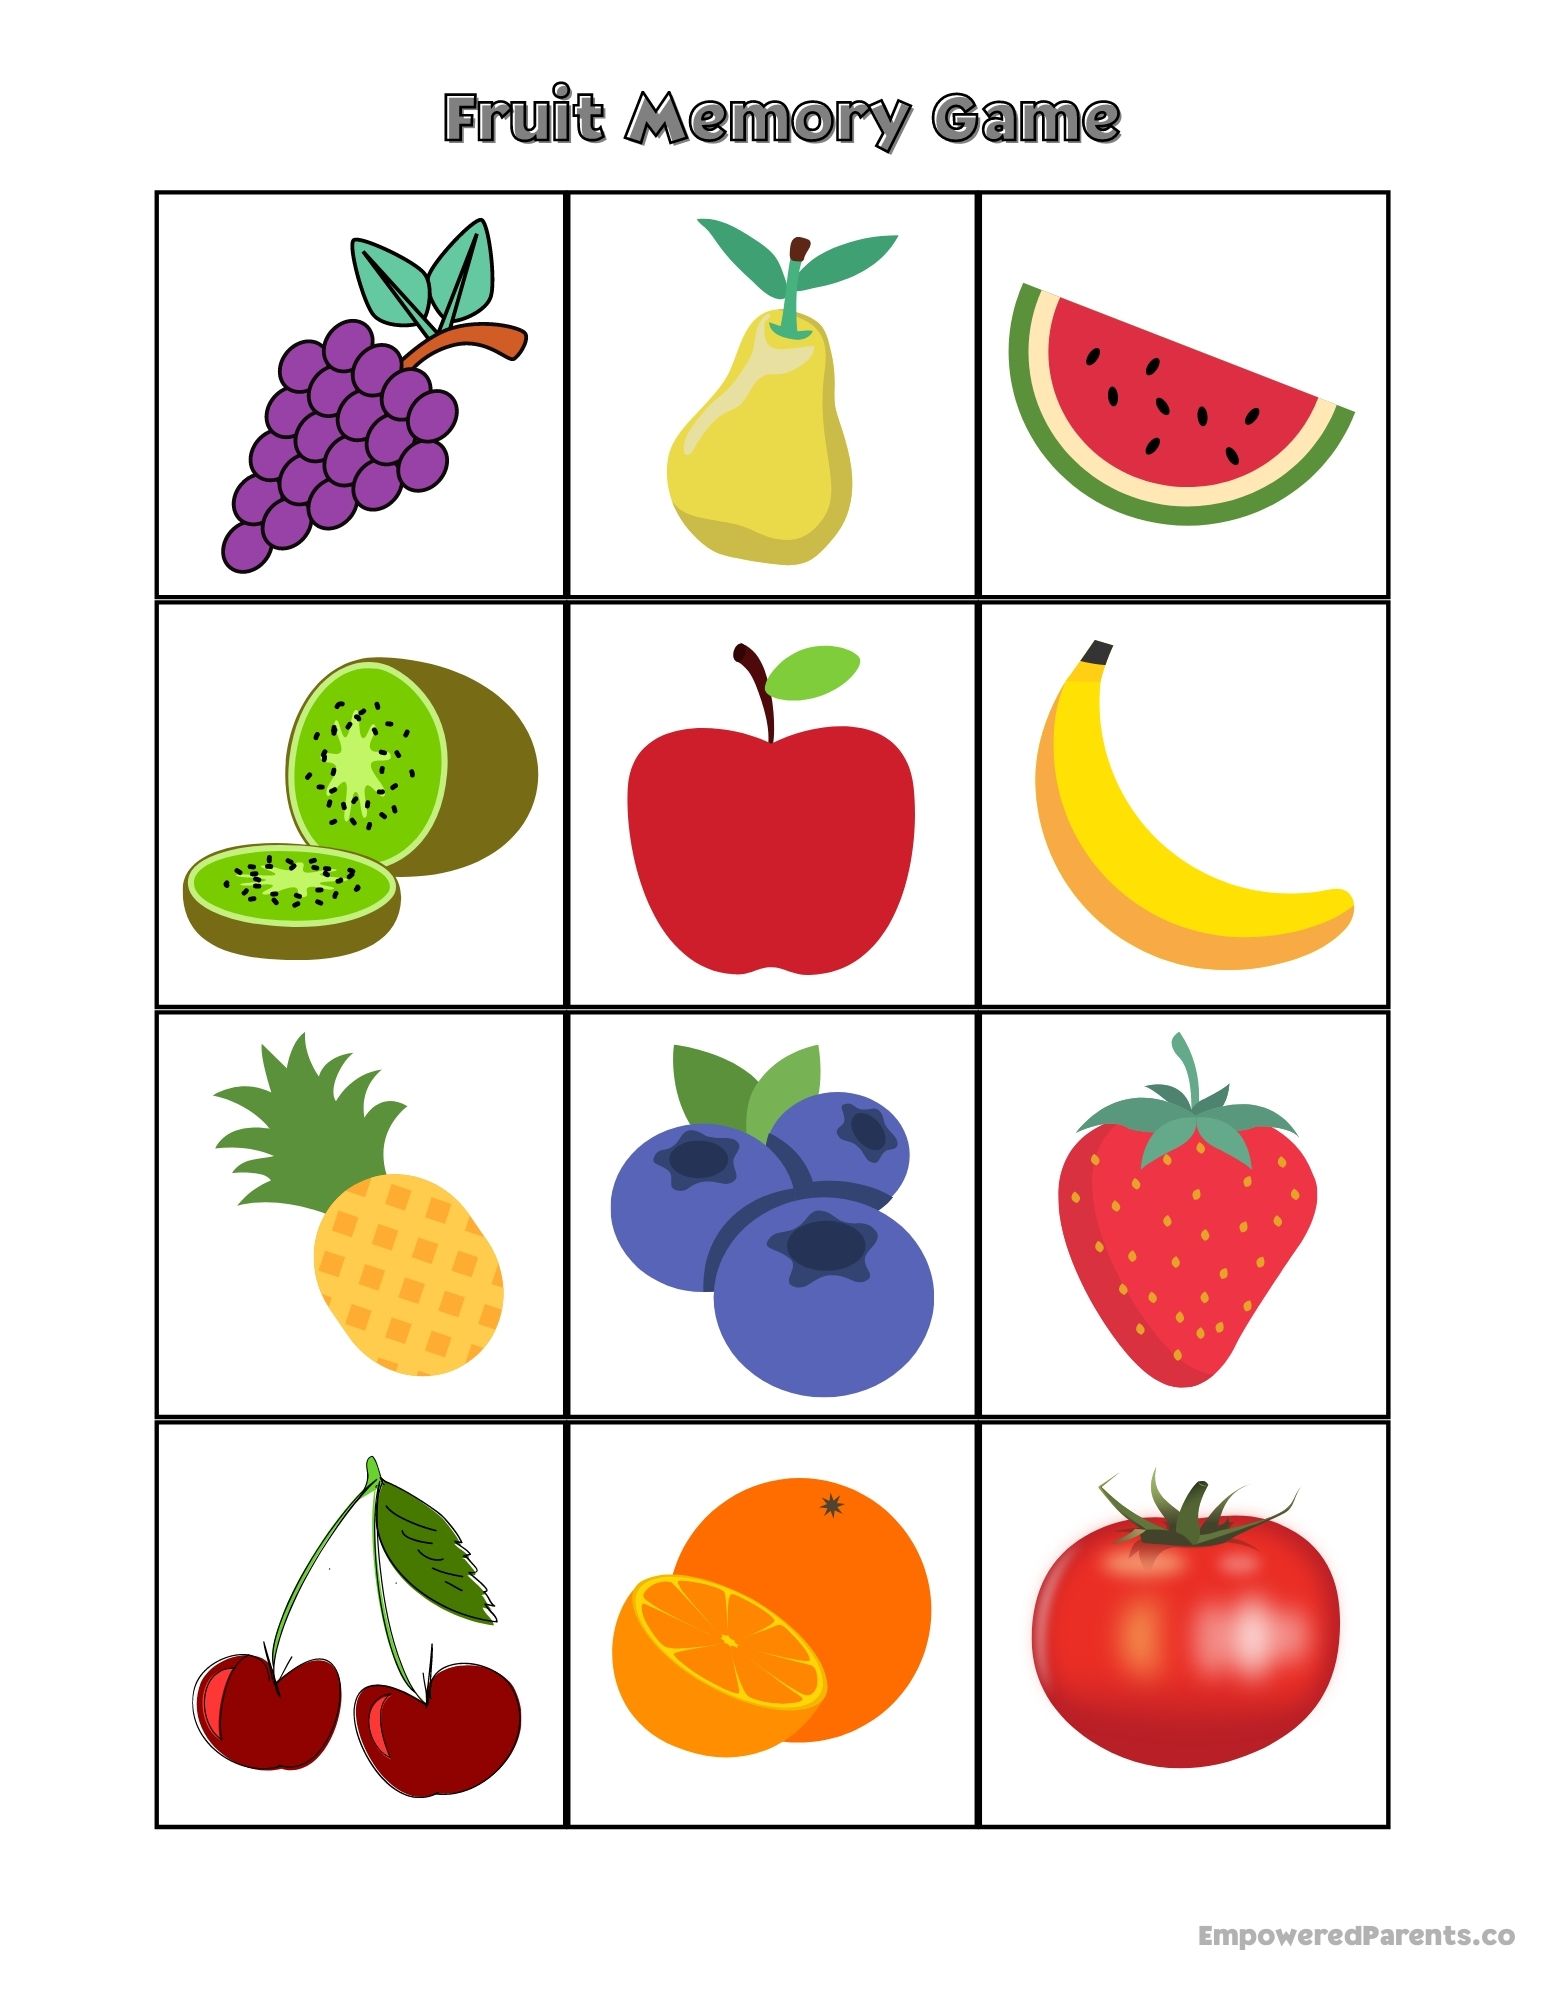 Fruit pictures from memory card game.